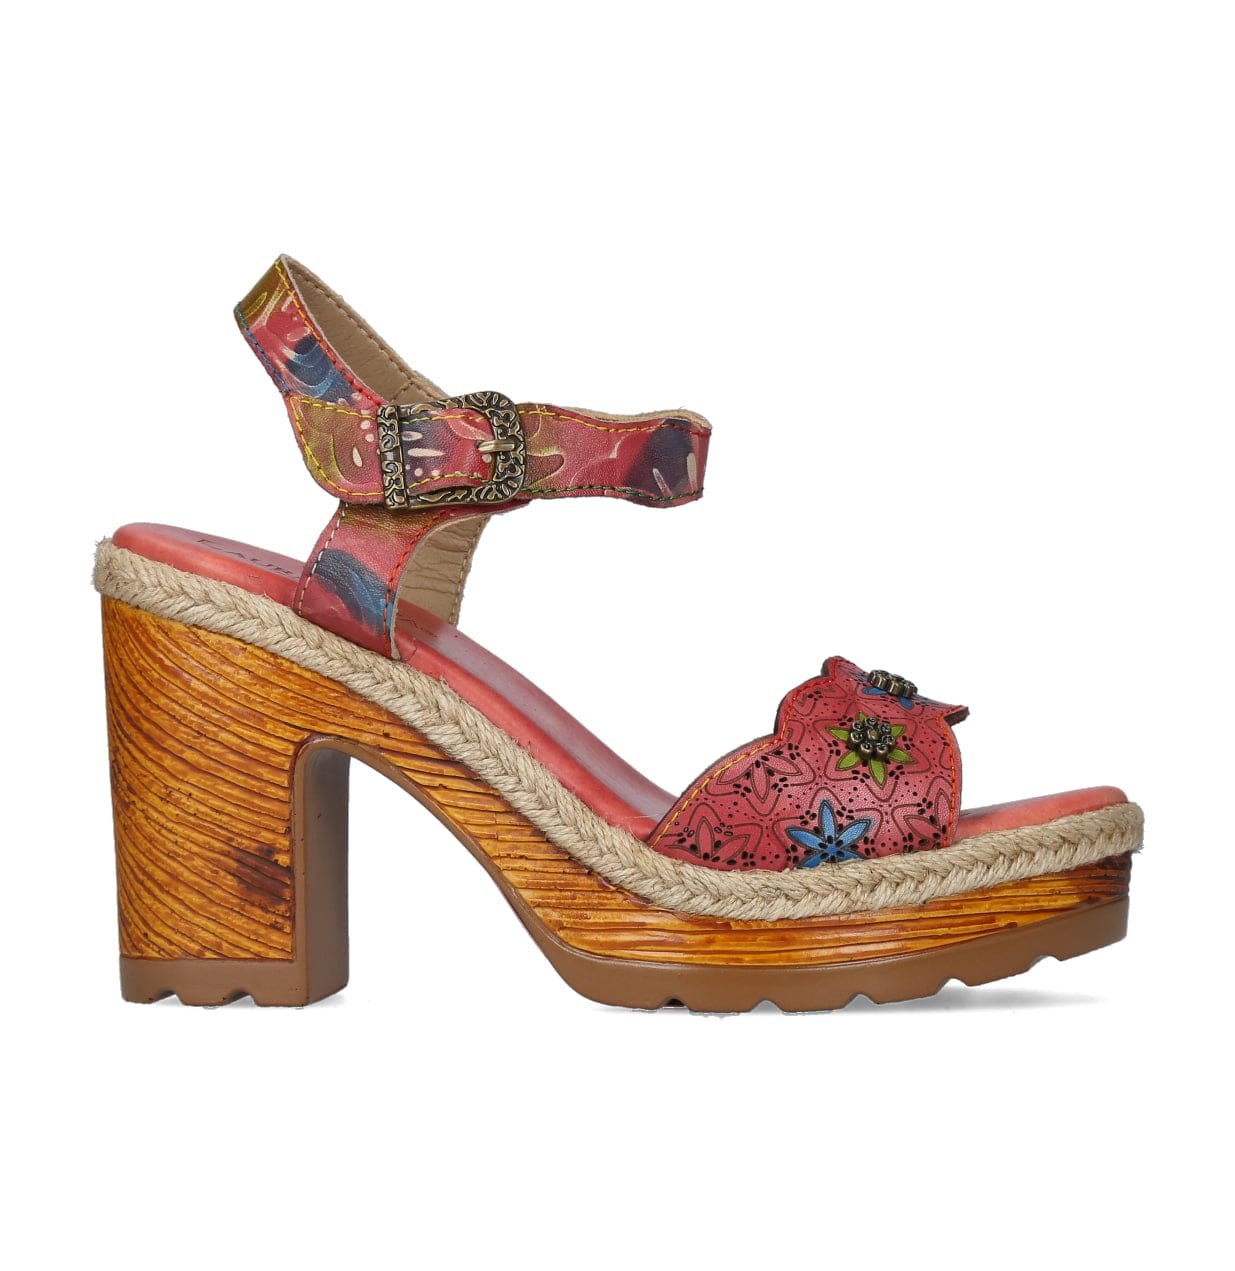 Chaussures JACAO 10 - 35 / Rose - Sandale